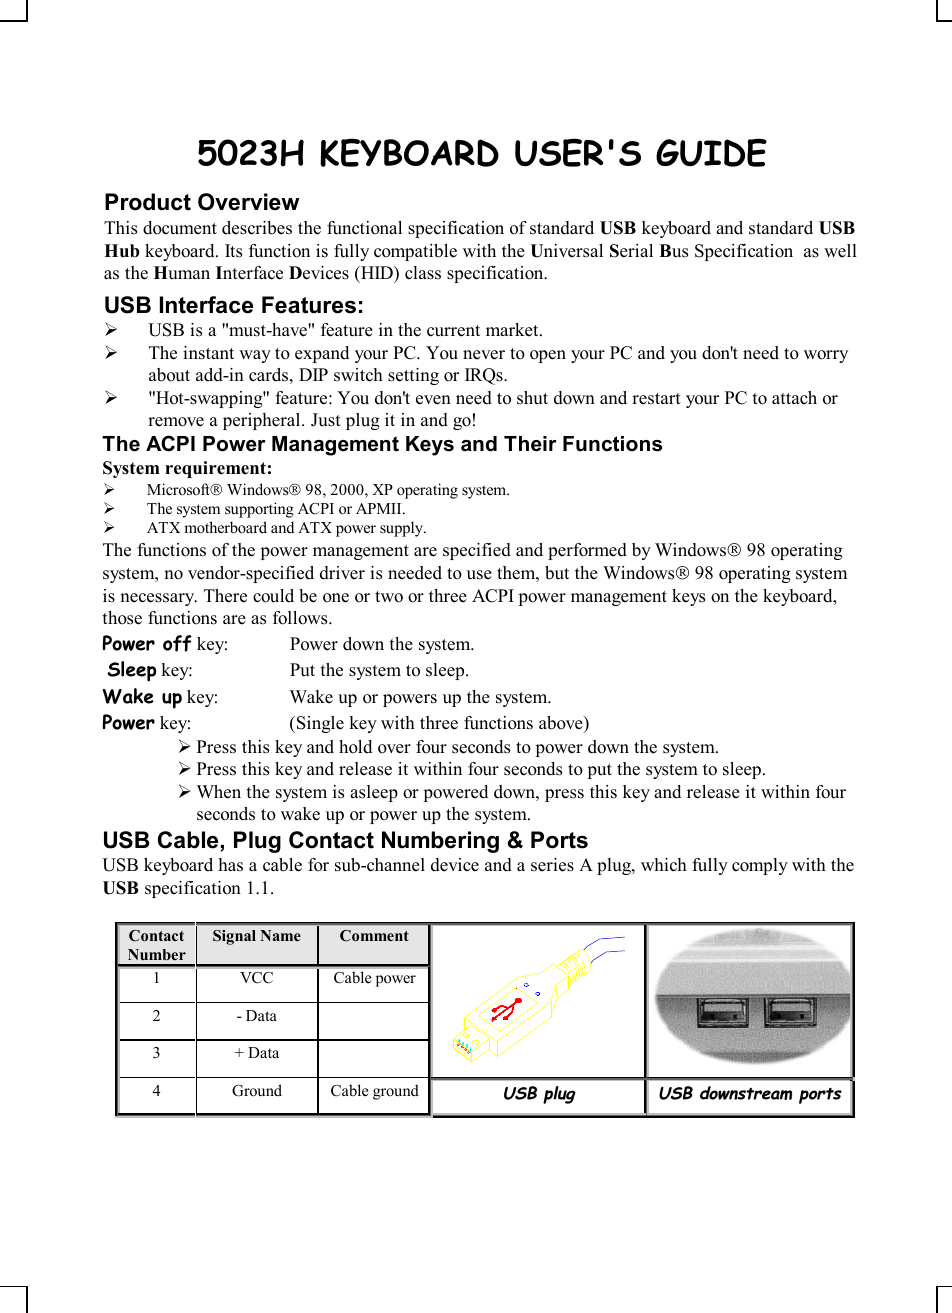    5023H KEYBOARD USER&apos;S GUIDE Product Overview This document describes the functional specification of standard USB keyboard and standard USB Hub keyboard. Its function is fully compatible with the Universal Serial Bus Specification  as well as the Human Interface Devices (HID) class specification. USB Interface Features: Ø USB is a &quot;must-have&quot; feature in the current market. Ø The instant way to expand your PC. You never to open your PC and you don&apos;t need to worry about add-in cards, DIP switch setting or IRQs. Ø &quot;Hot-swapping&quot; feature: You don&apos;t even need to shut down and restart your PC to attach or remove a peripheral. Just plug it in and go! The ACPI Power Management Keys and Their Functions System requirement:  Ø MicrosoftÒ WindowsÒ 98, 2000, XP operating system. Ø The system supporting ACPI or APMII. Ø ATX motherboard and ATX power supply. The functions of the power management are specified and performed by WindowsÒ 98 operating system, no vendor-specified driver is needed to use them, but the WindowsÒ 98 operating system is necessary. There could be one or two or three ACPI power management keys on the keyboard, those functions are as follows. Power off key:  Power down the system.  Sleep key:  Put the system to sleep.  Wake up key:  Wake up or powers up the system.  Power key:  (Single key with three functions above)      Ø Press this key and hold over four seconds to power down the system. Ø Press this key and release it within four seconds to put the system to sleep. Ø When the system is asleep or powered down, press this key and release it within four seconds to wake up or power up the system. USB Cable, Plug Contact Numbering &amp; Ports USB keyboard has a cable for sub-channel device and a series A plug, which fully comply with the USB specification 1.1.  Contact Number Signal Name  Comment 1  VCC  Cable power 2  - Data   3  + Data     4  Ground  Cable ground UUSSBB  pplluugg  UUSSBB  ddoowwnnssttrreeaamm  ppoorrttss    